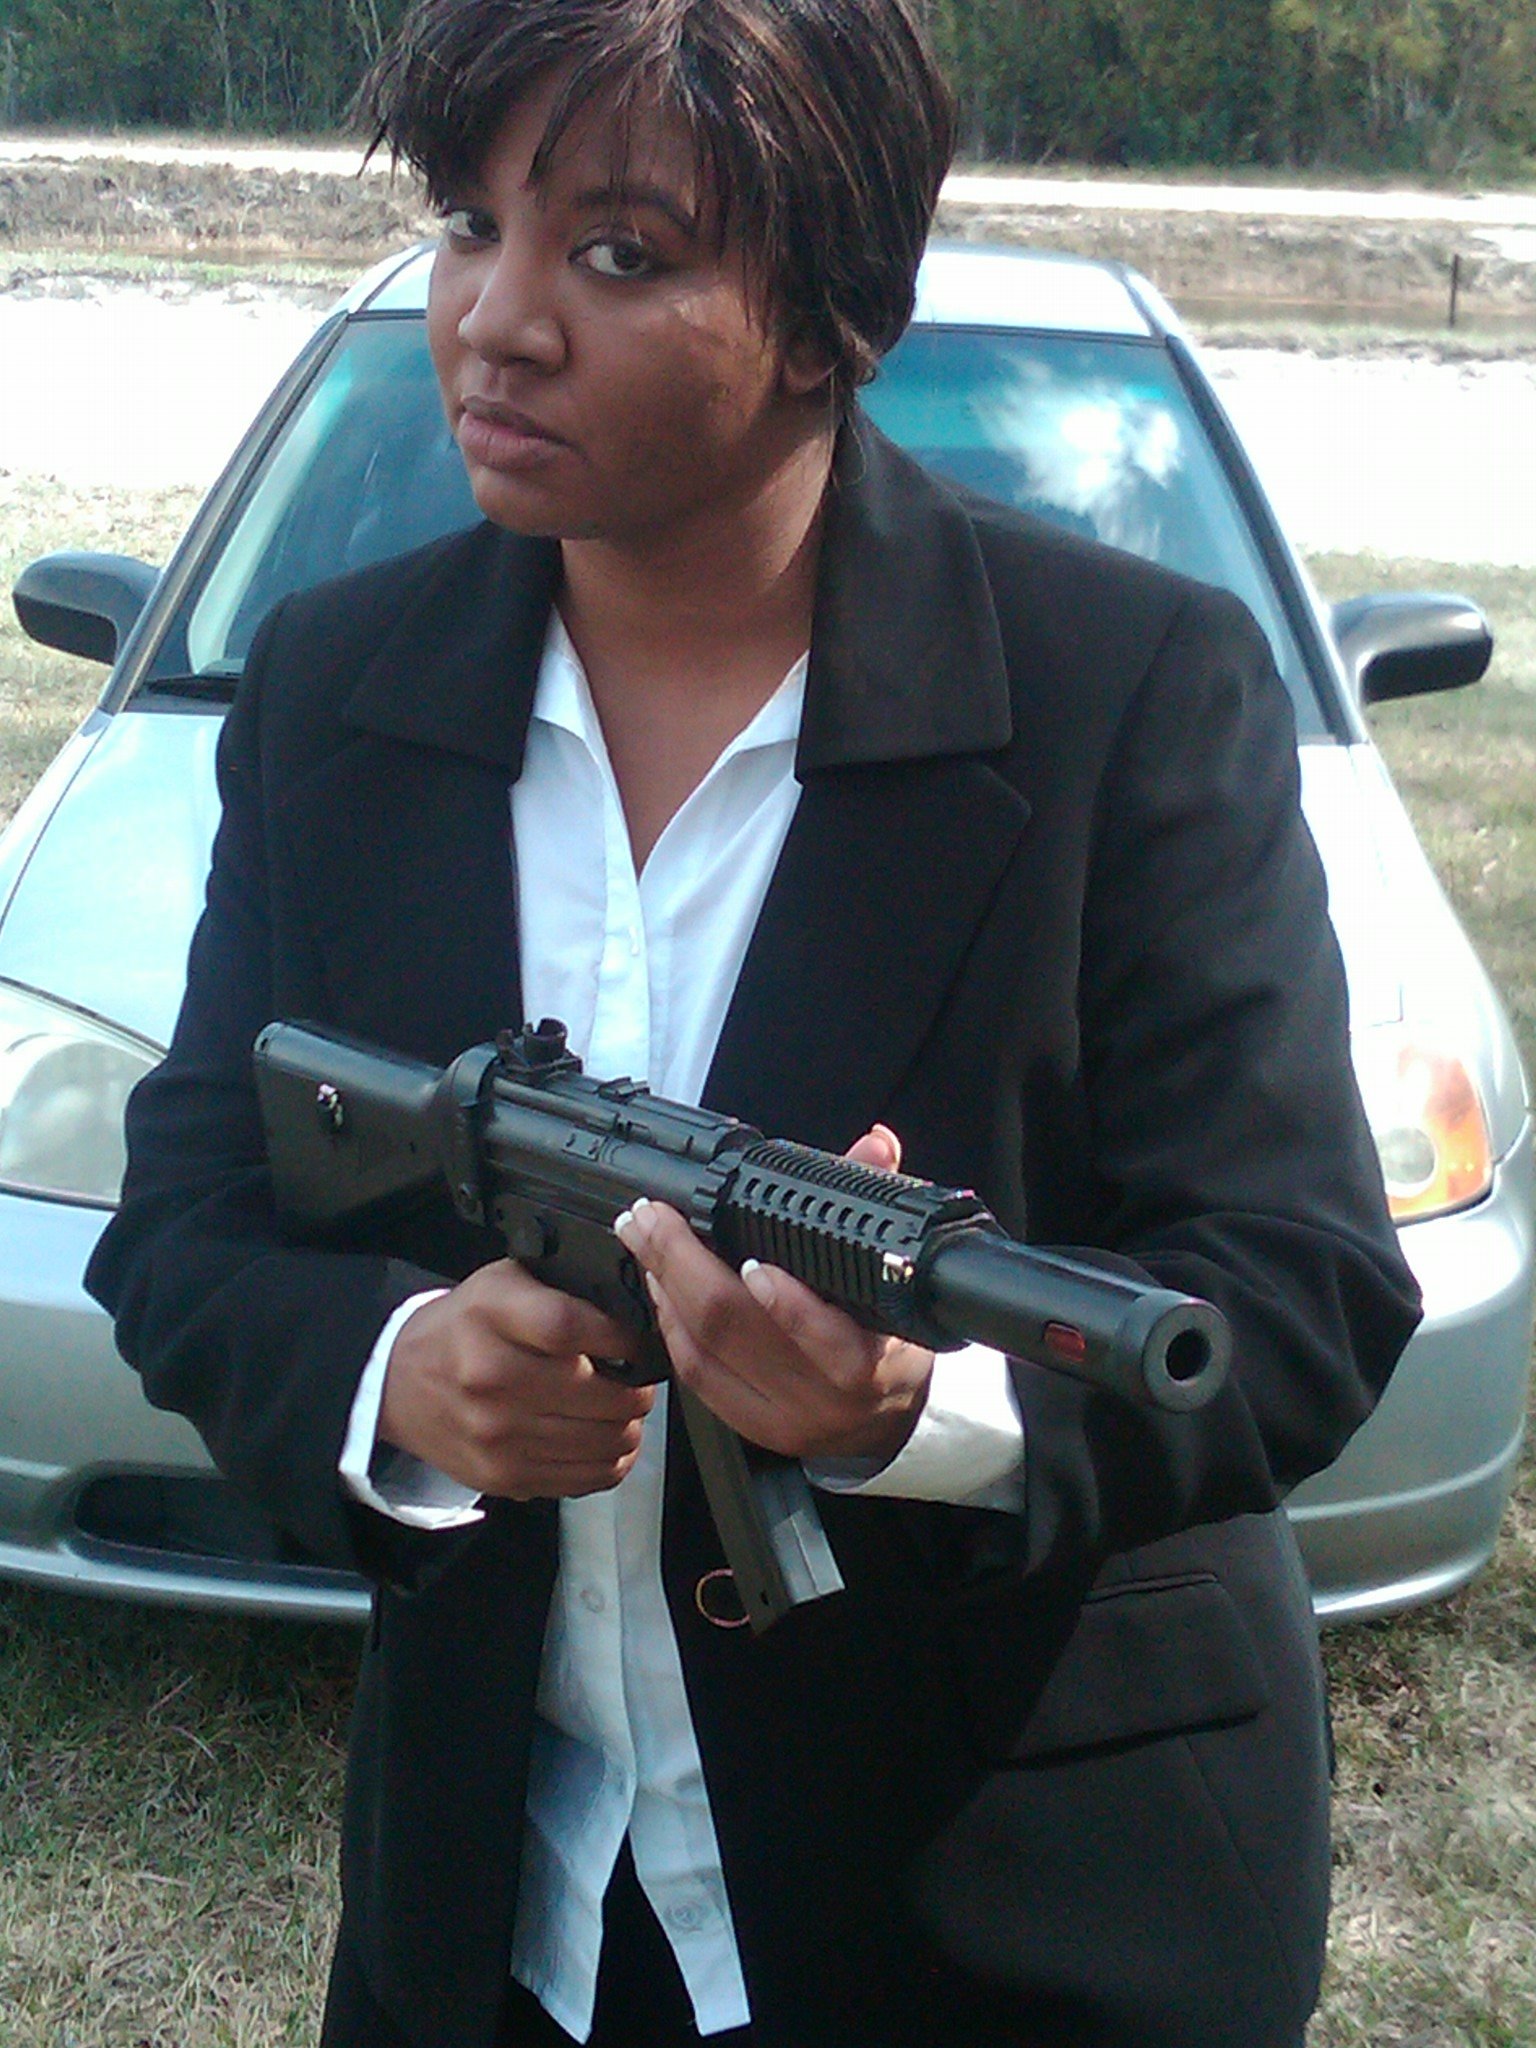 Nicole Denise Hodges played a private agent in the tv series The Detective Story. The narrative story is directed by Gary Davis of Chocolate Star Entertainment.